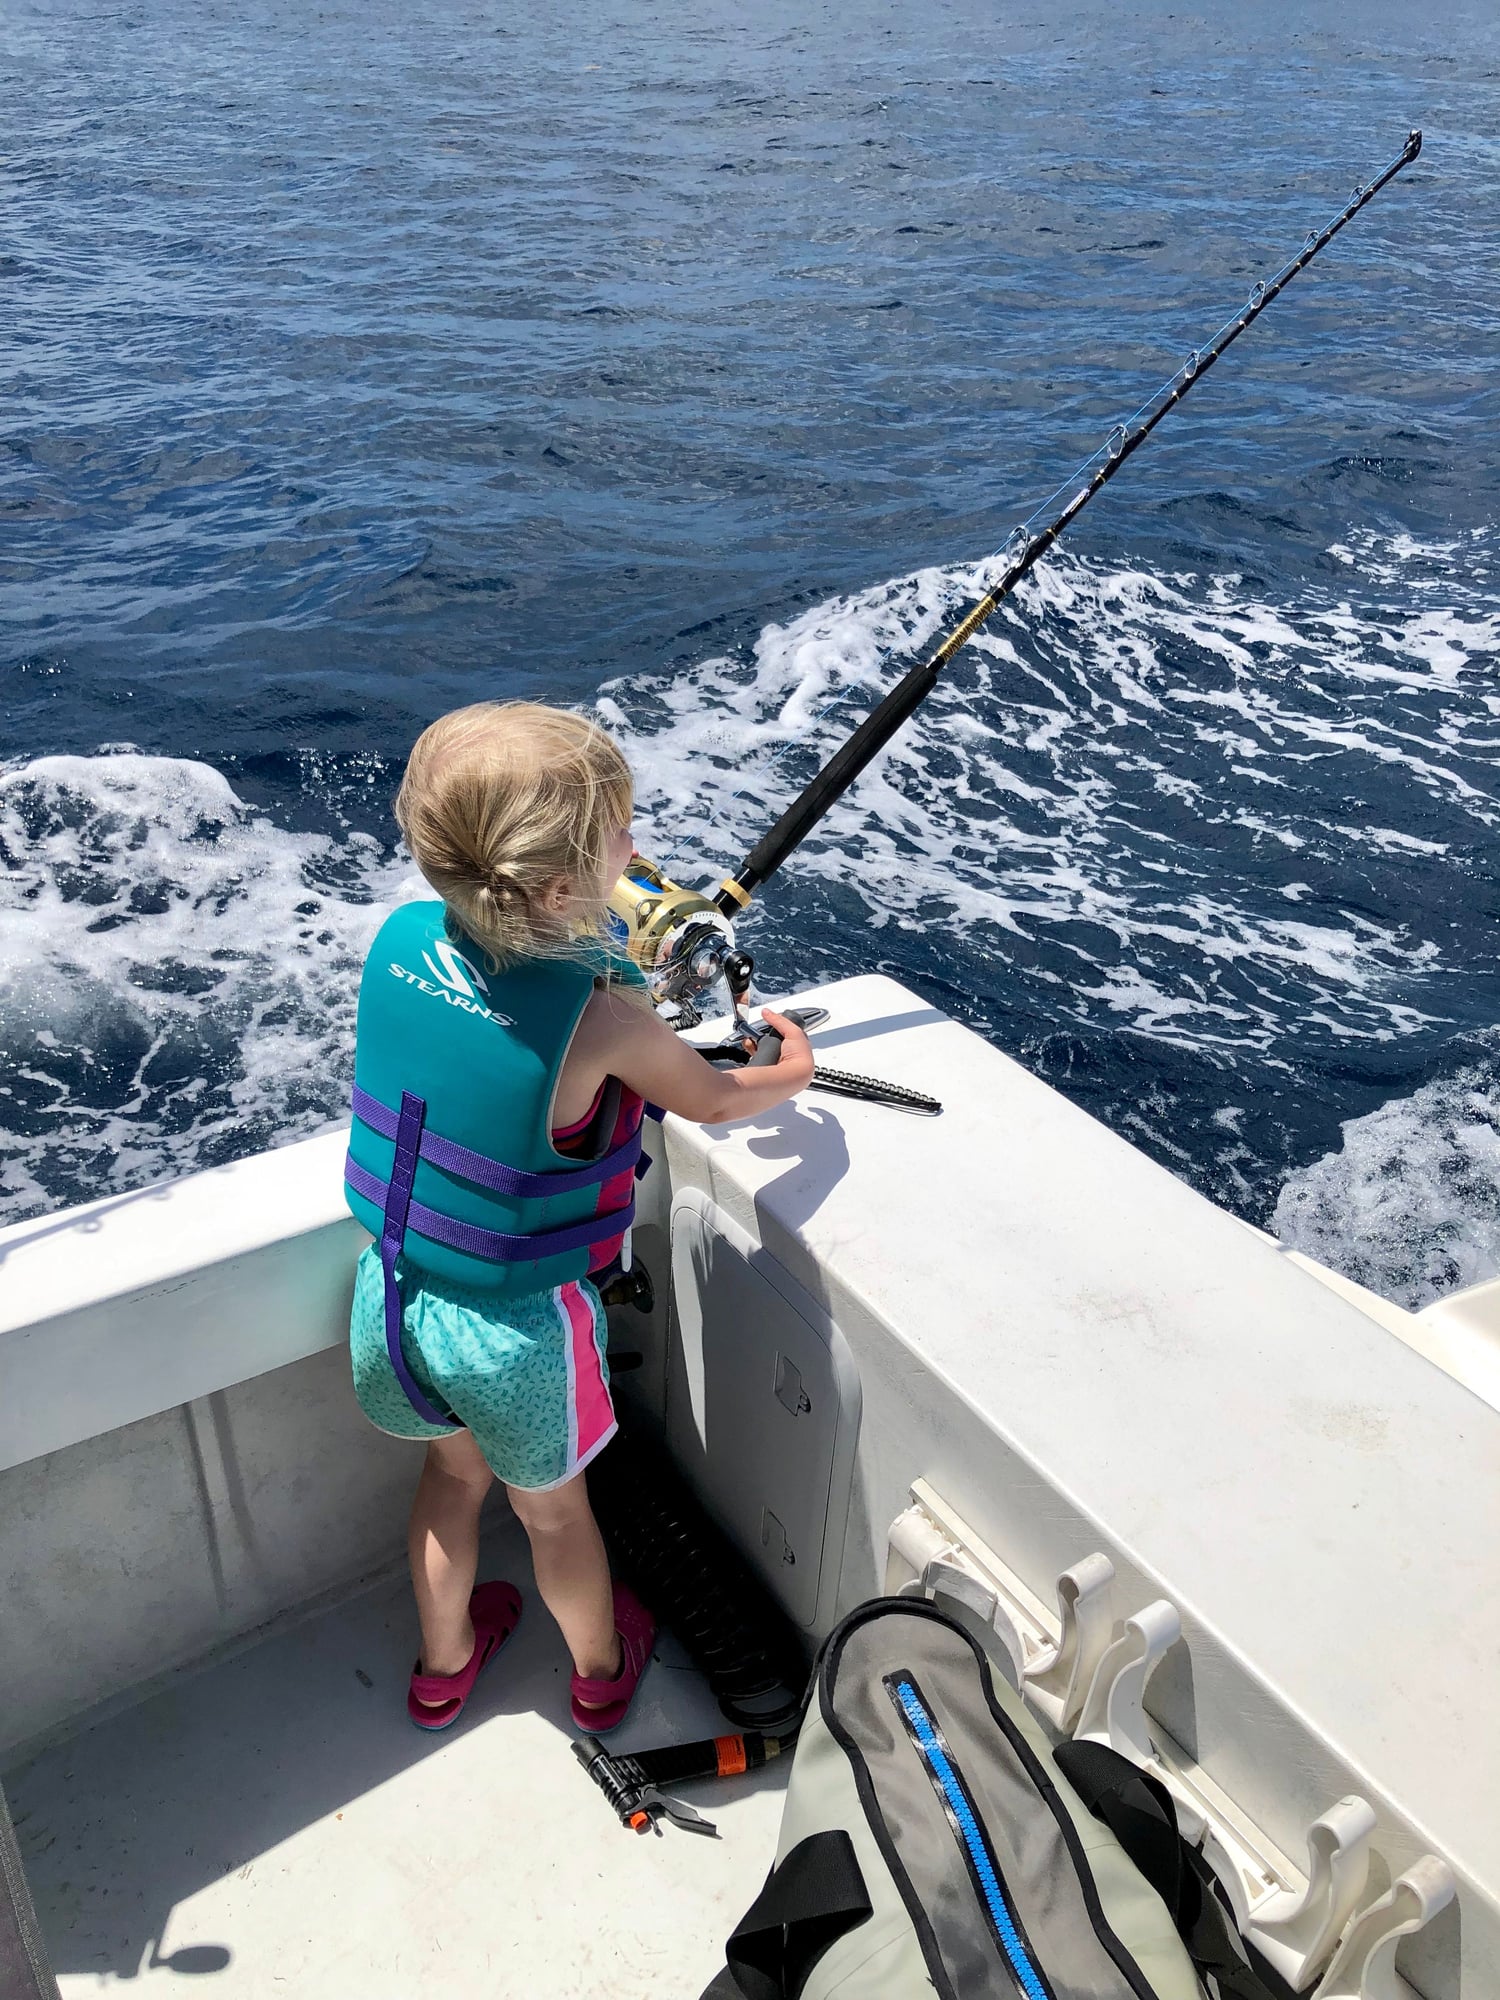 Best rod and reel for young kids? - The Hull Truth - Boating and